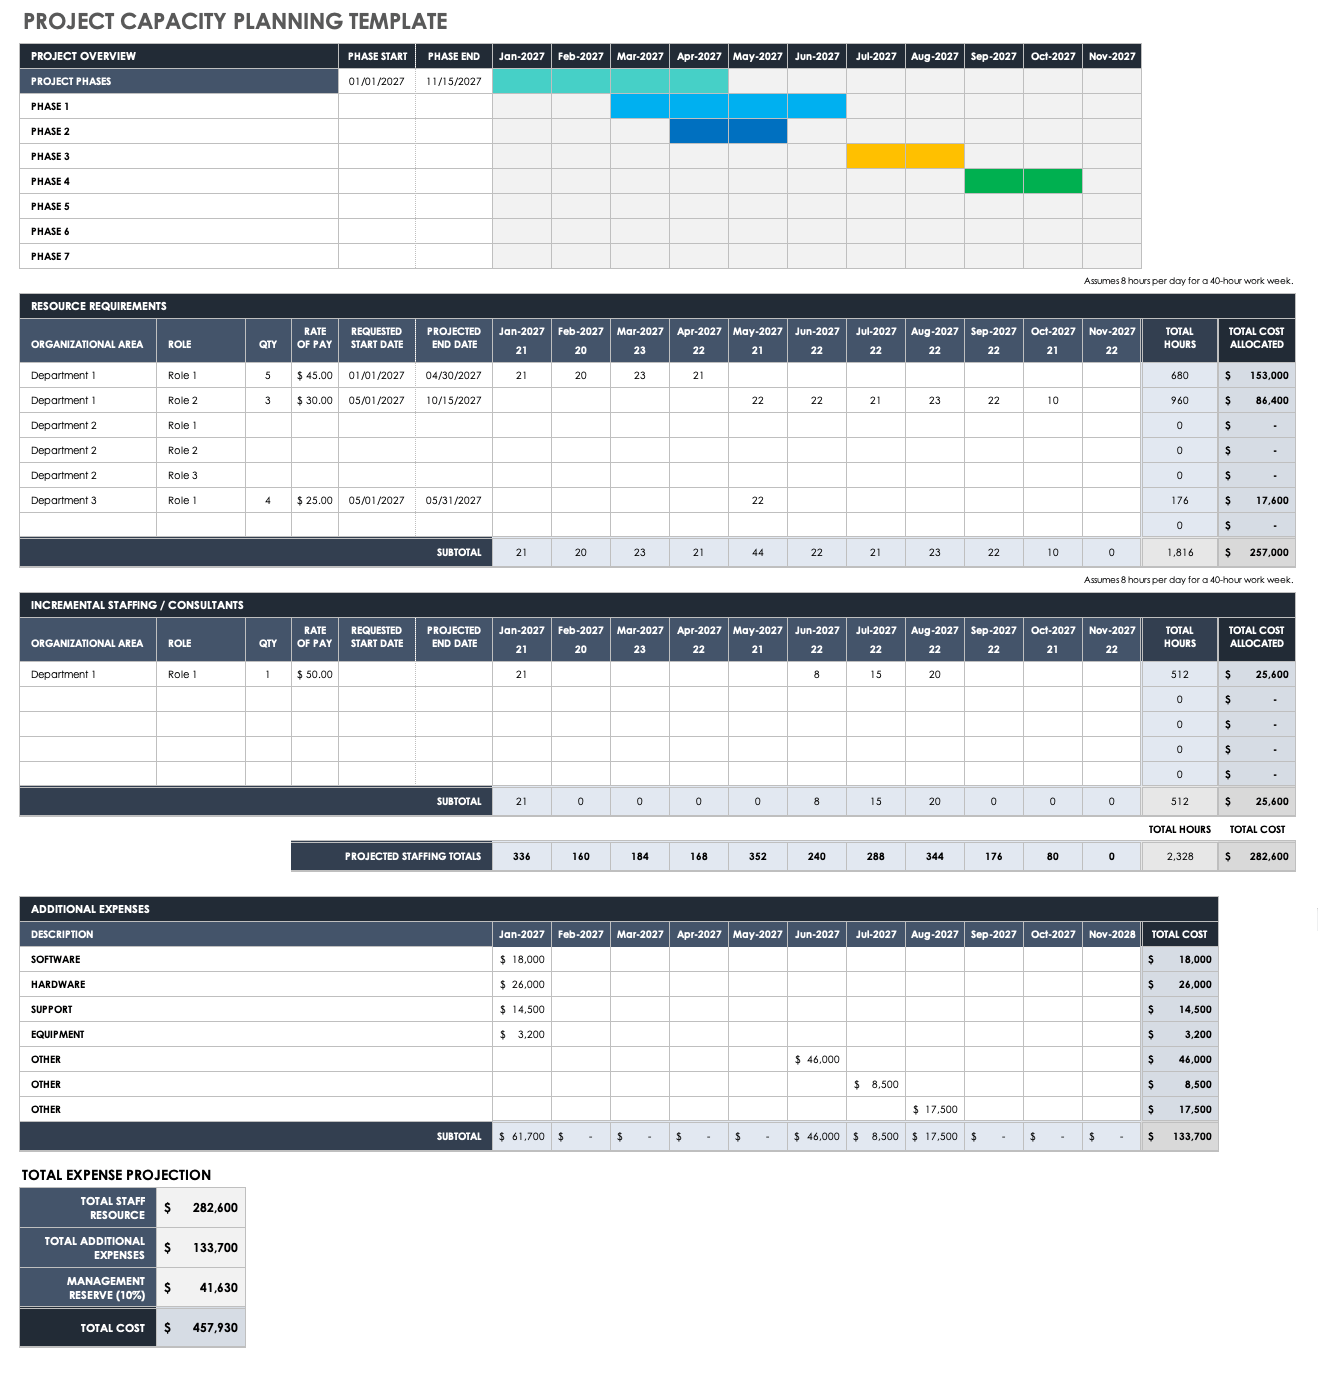 Project Capacity Planning Template